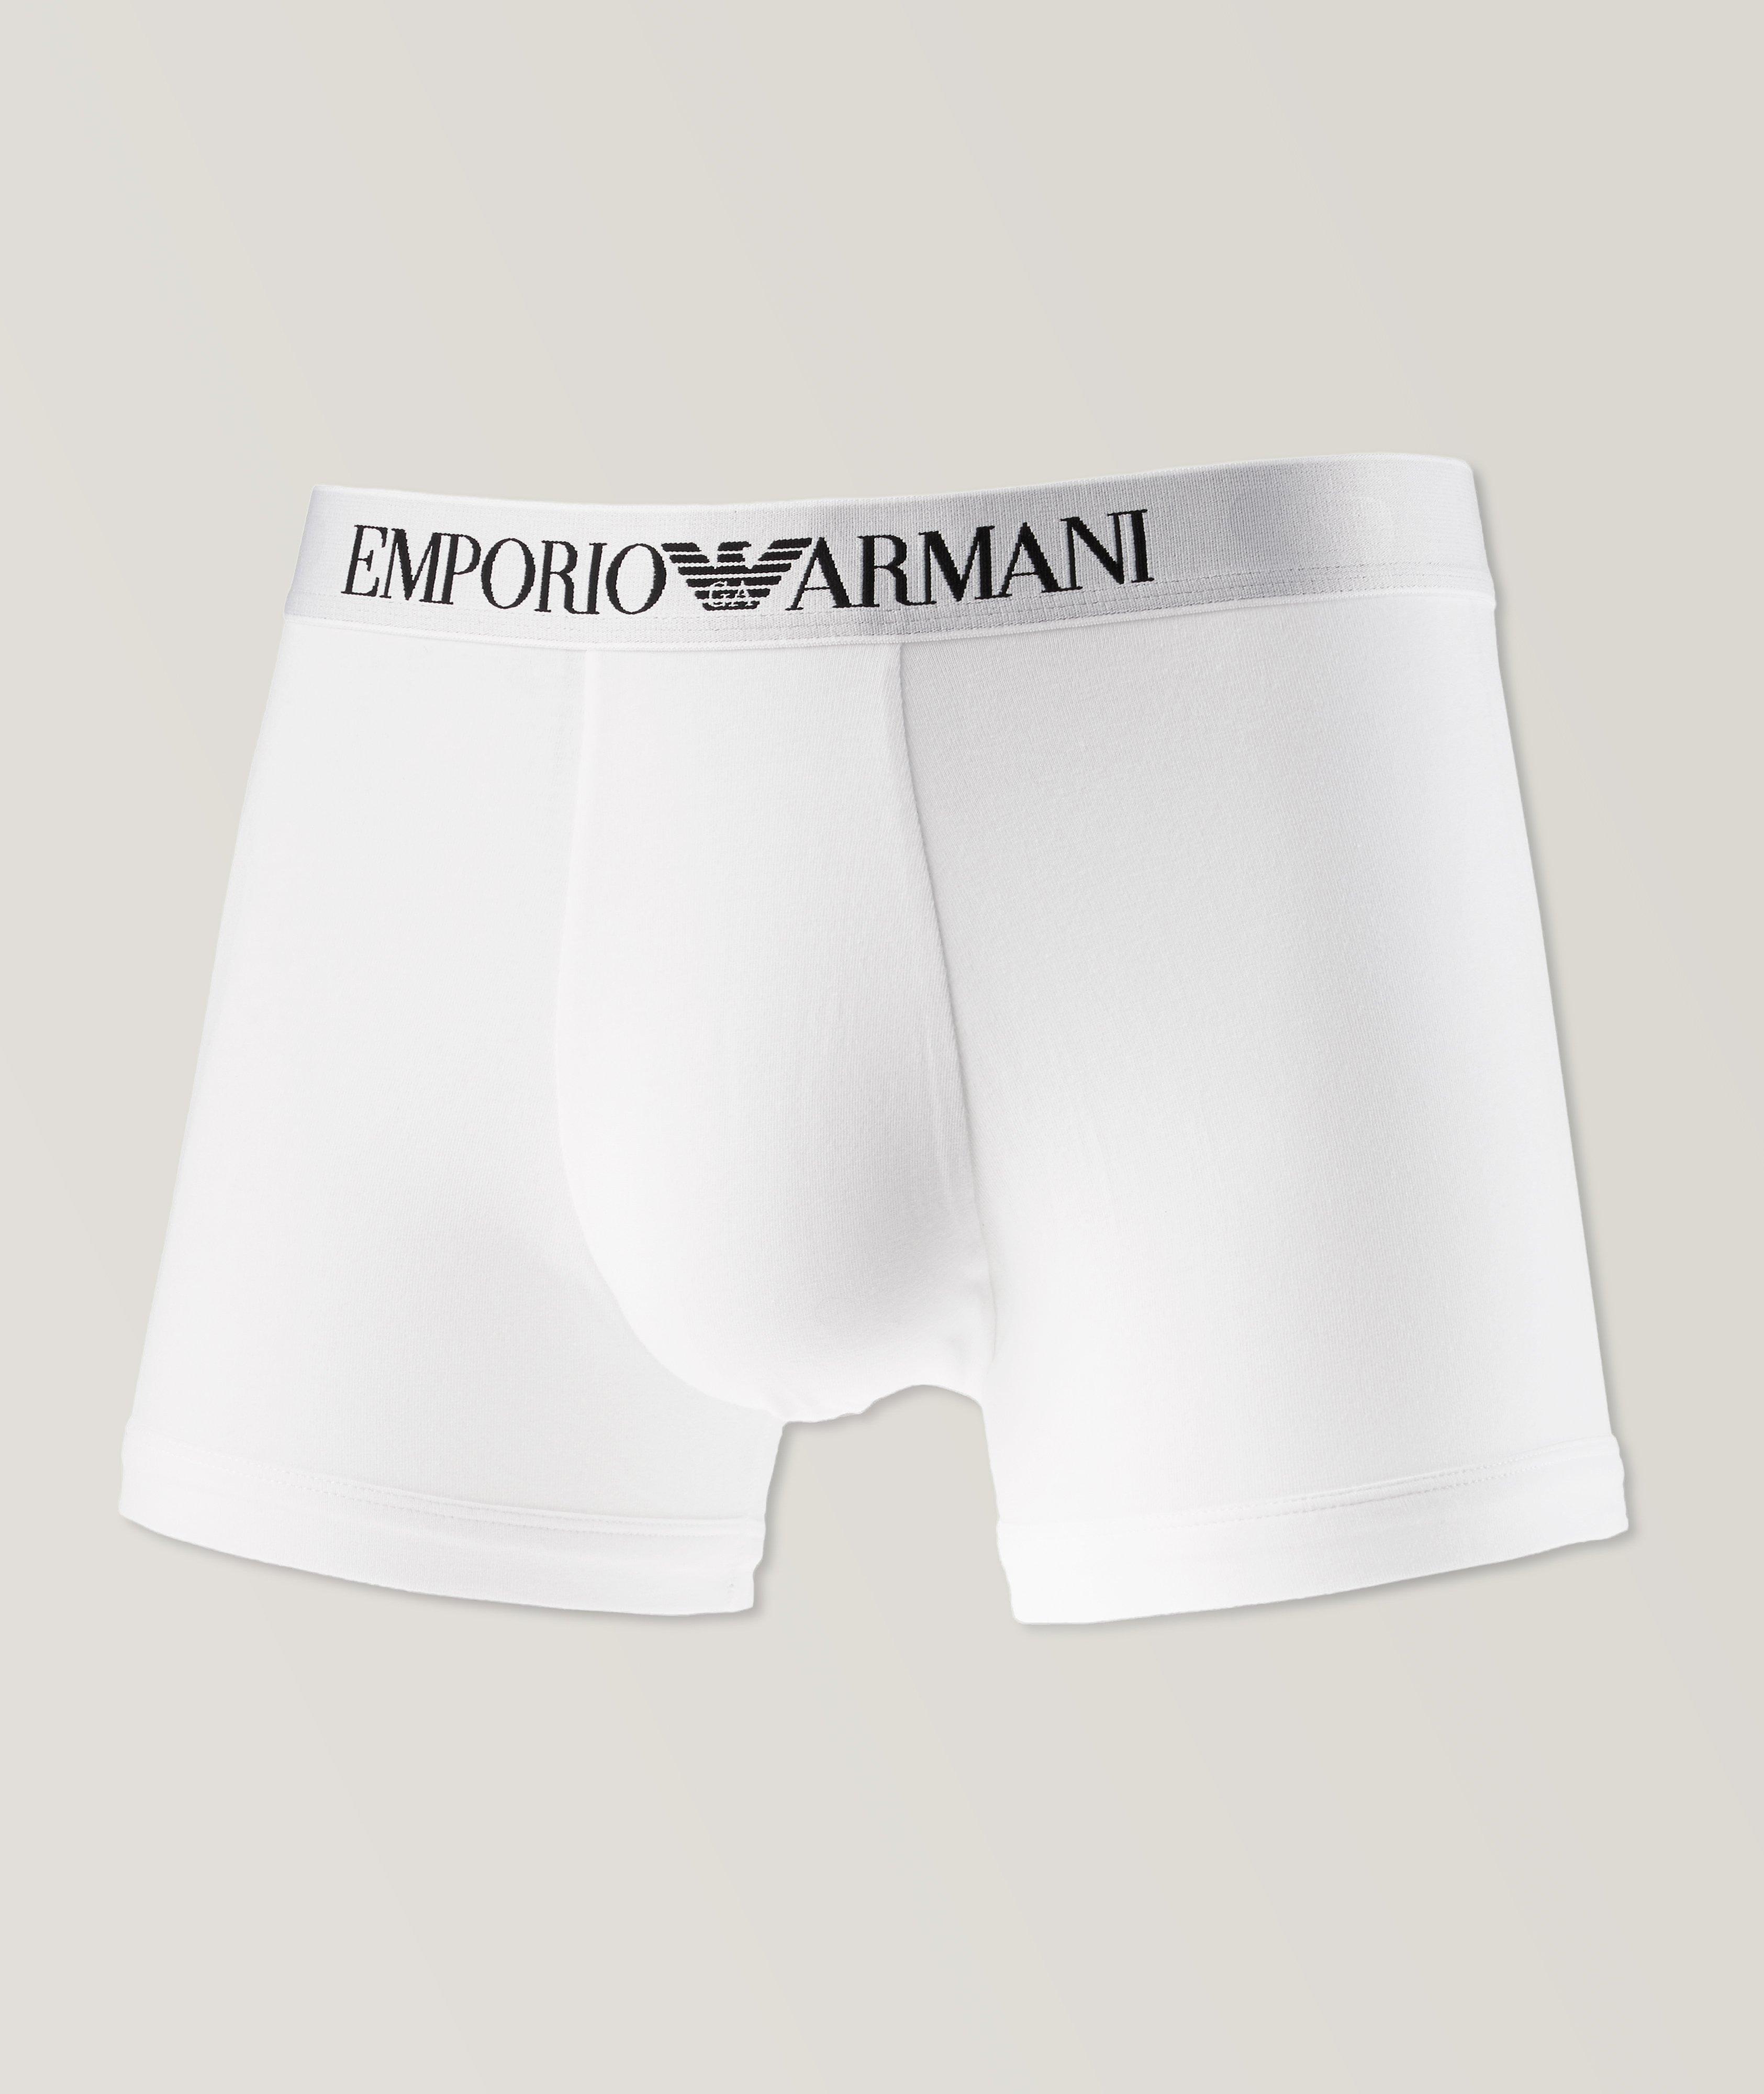 Emporio Armani Knitted Underwear Trunks in Pink for Men